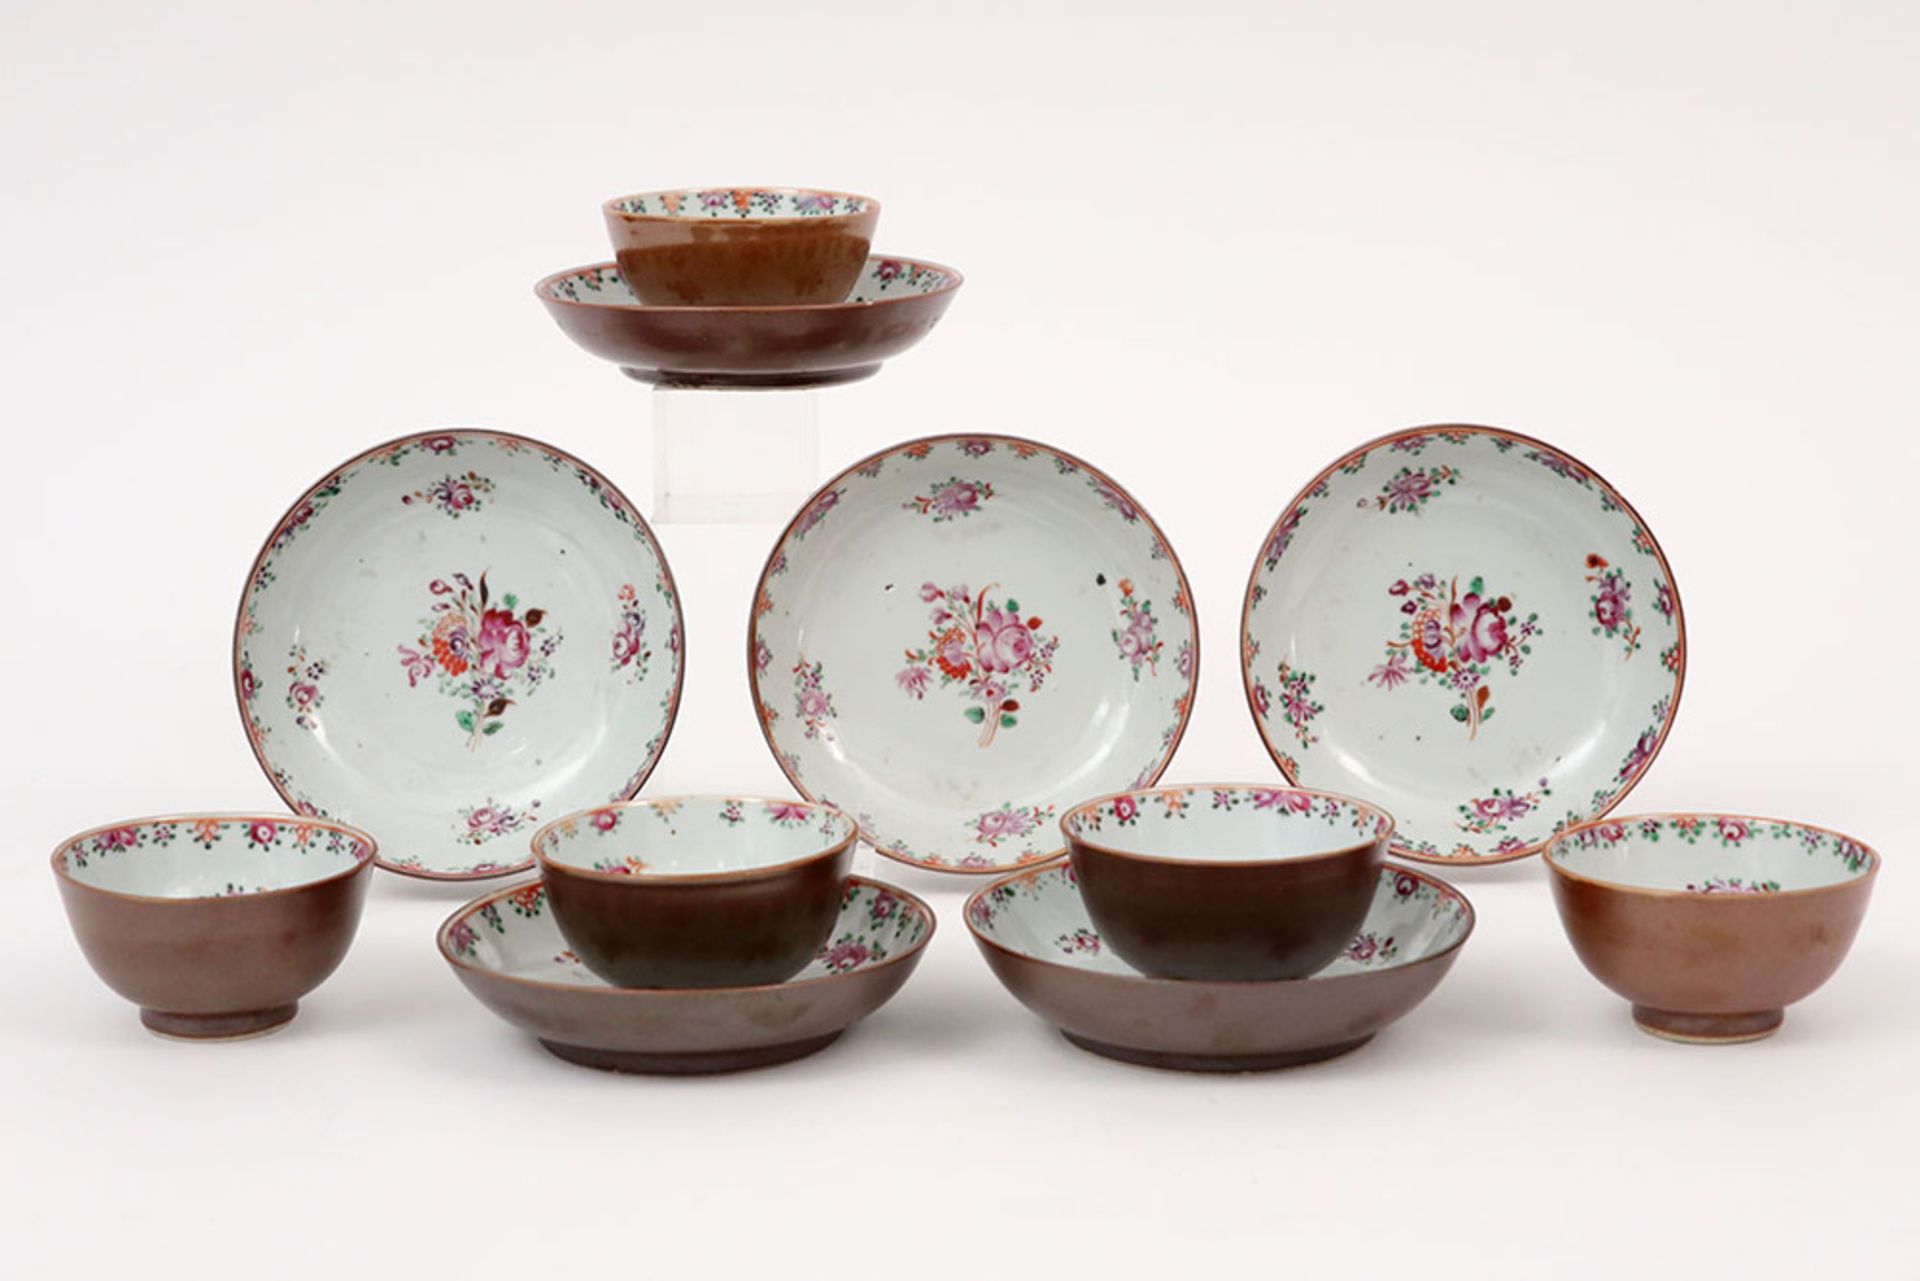 series of five 18th Cent. Chinese sets of cup and saucer in capuchin brown porcelain with 'Famille